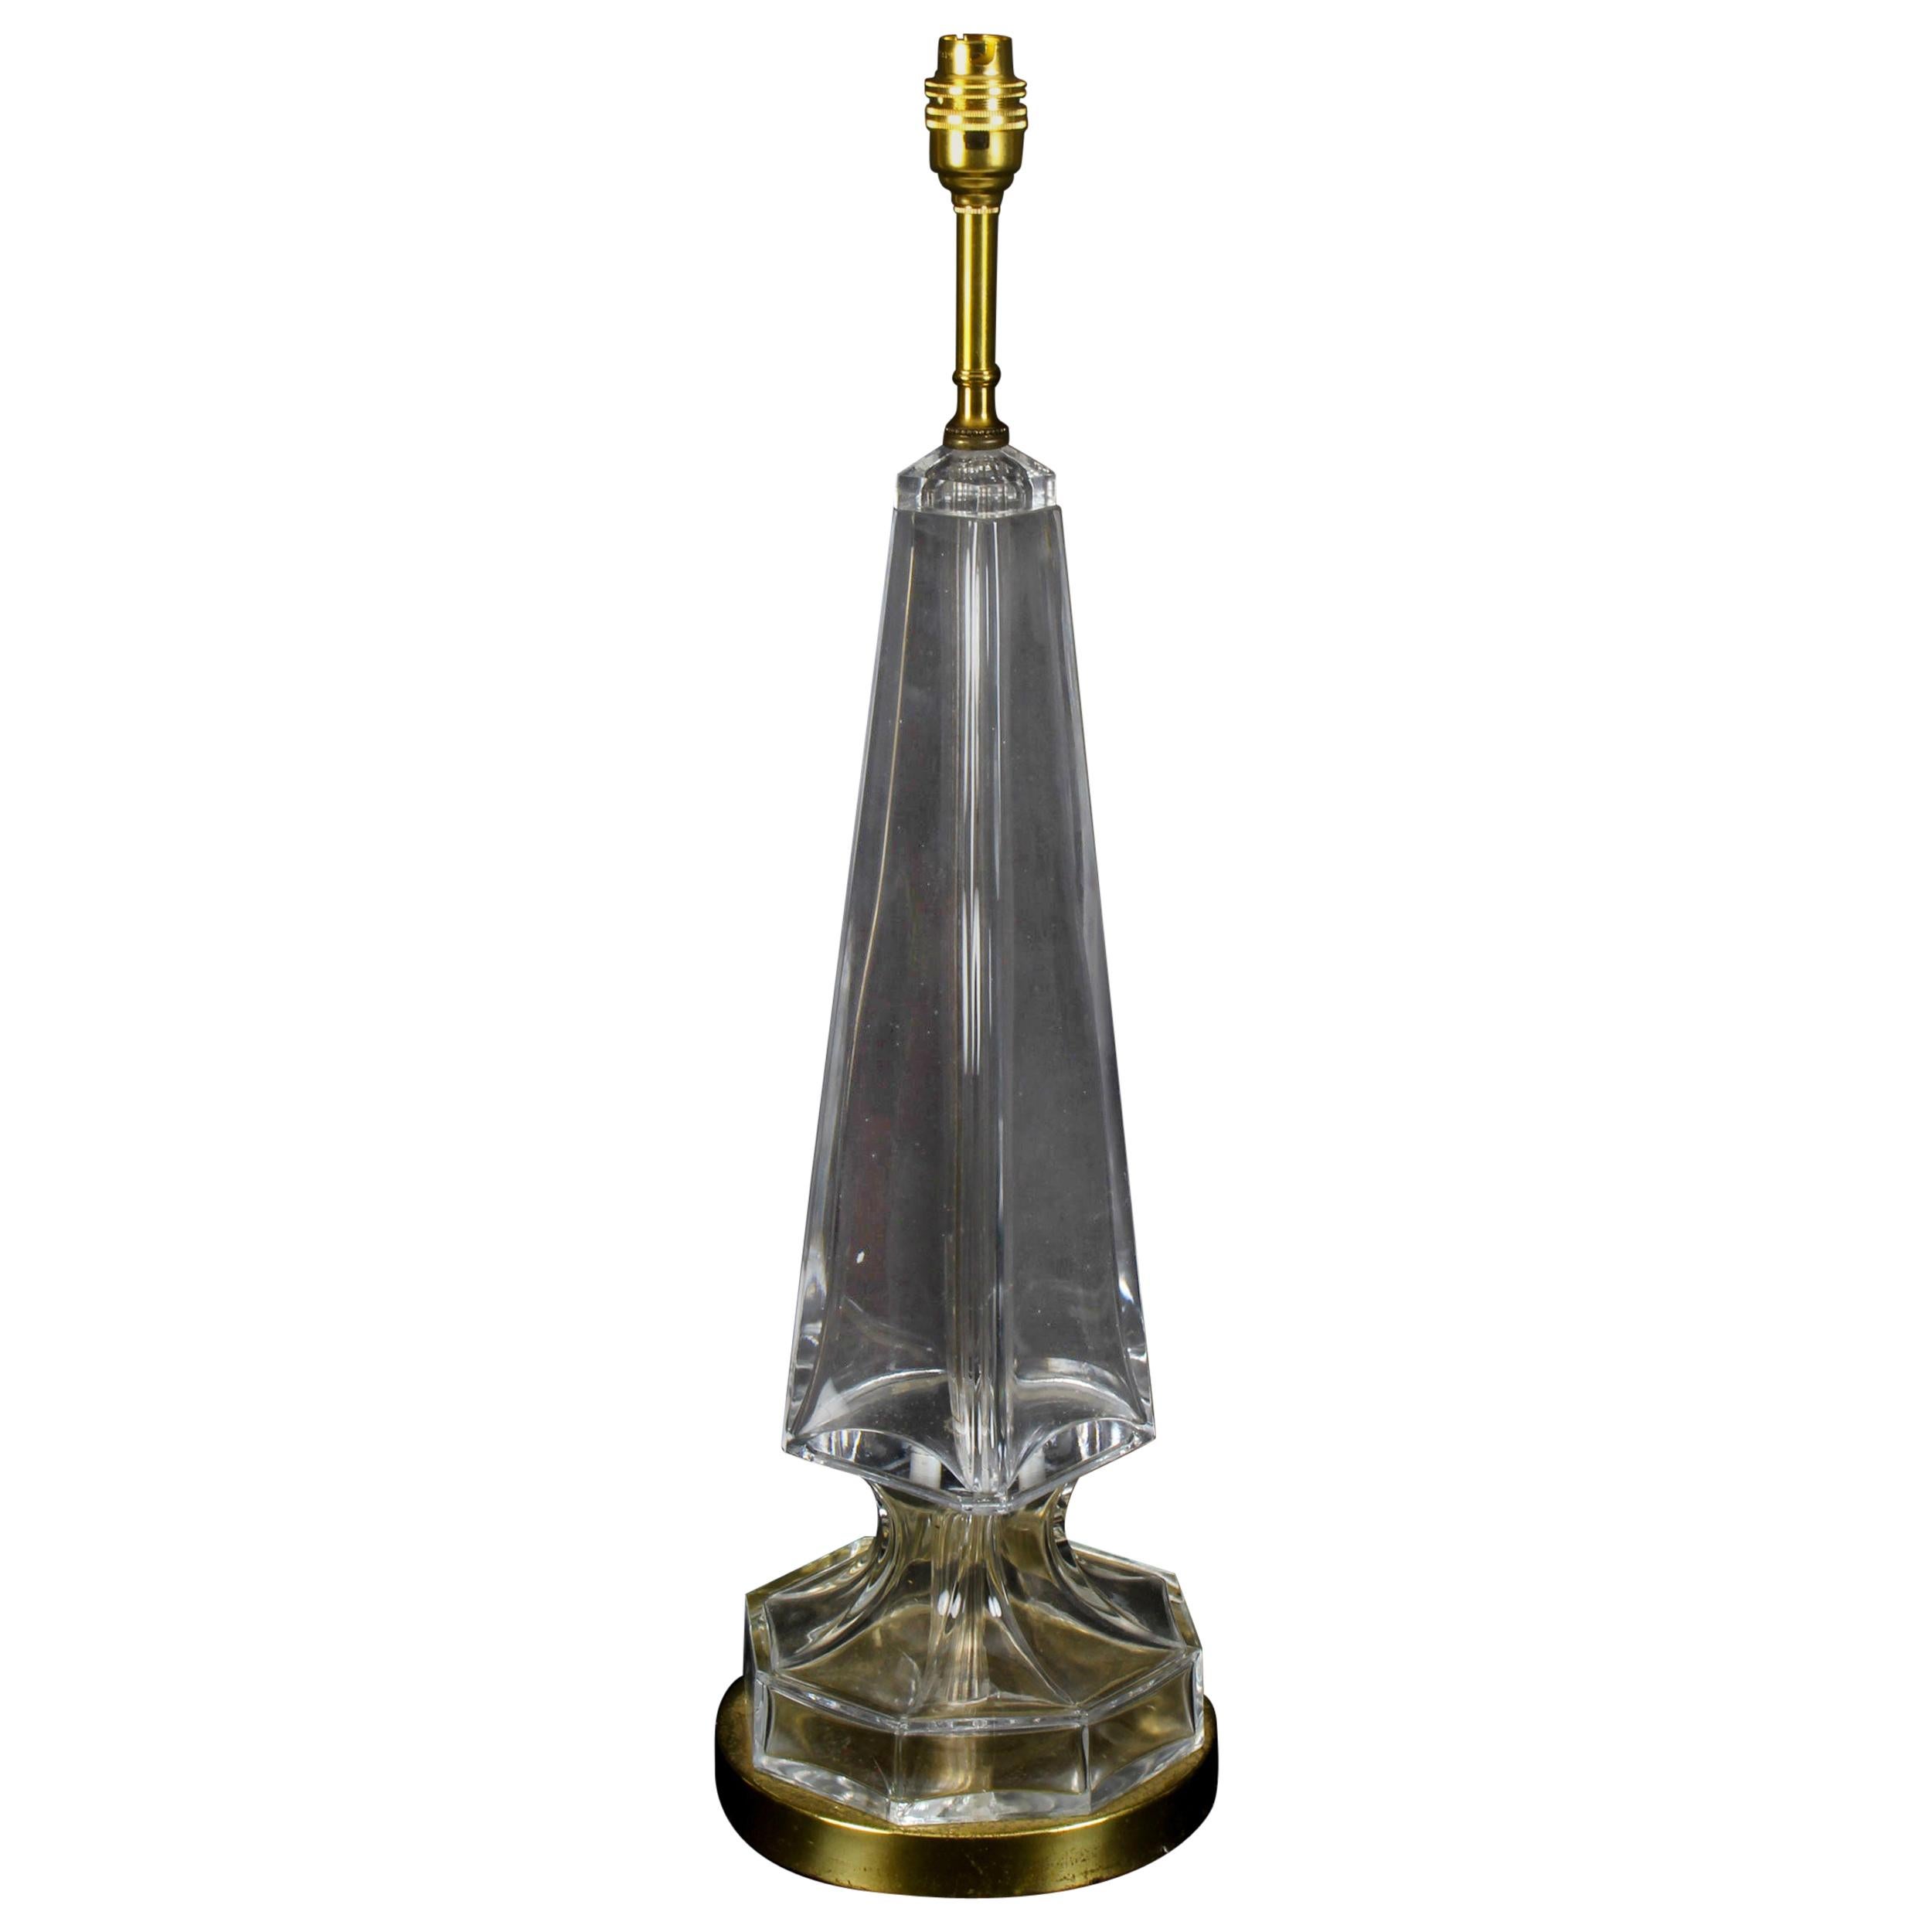 Vintage Glass and Brass Table Lamp of Obelisk Form, Mid-20th Century For Sale